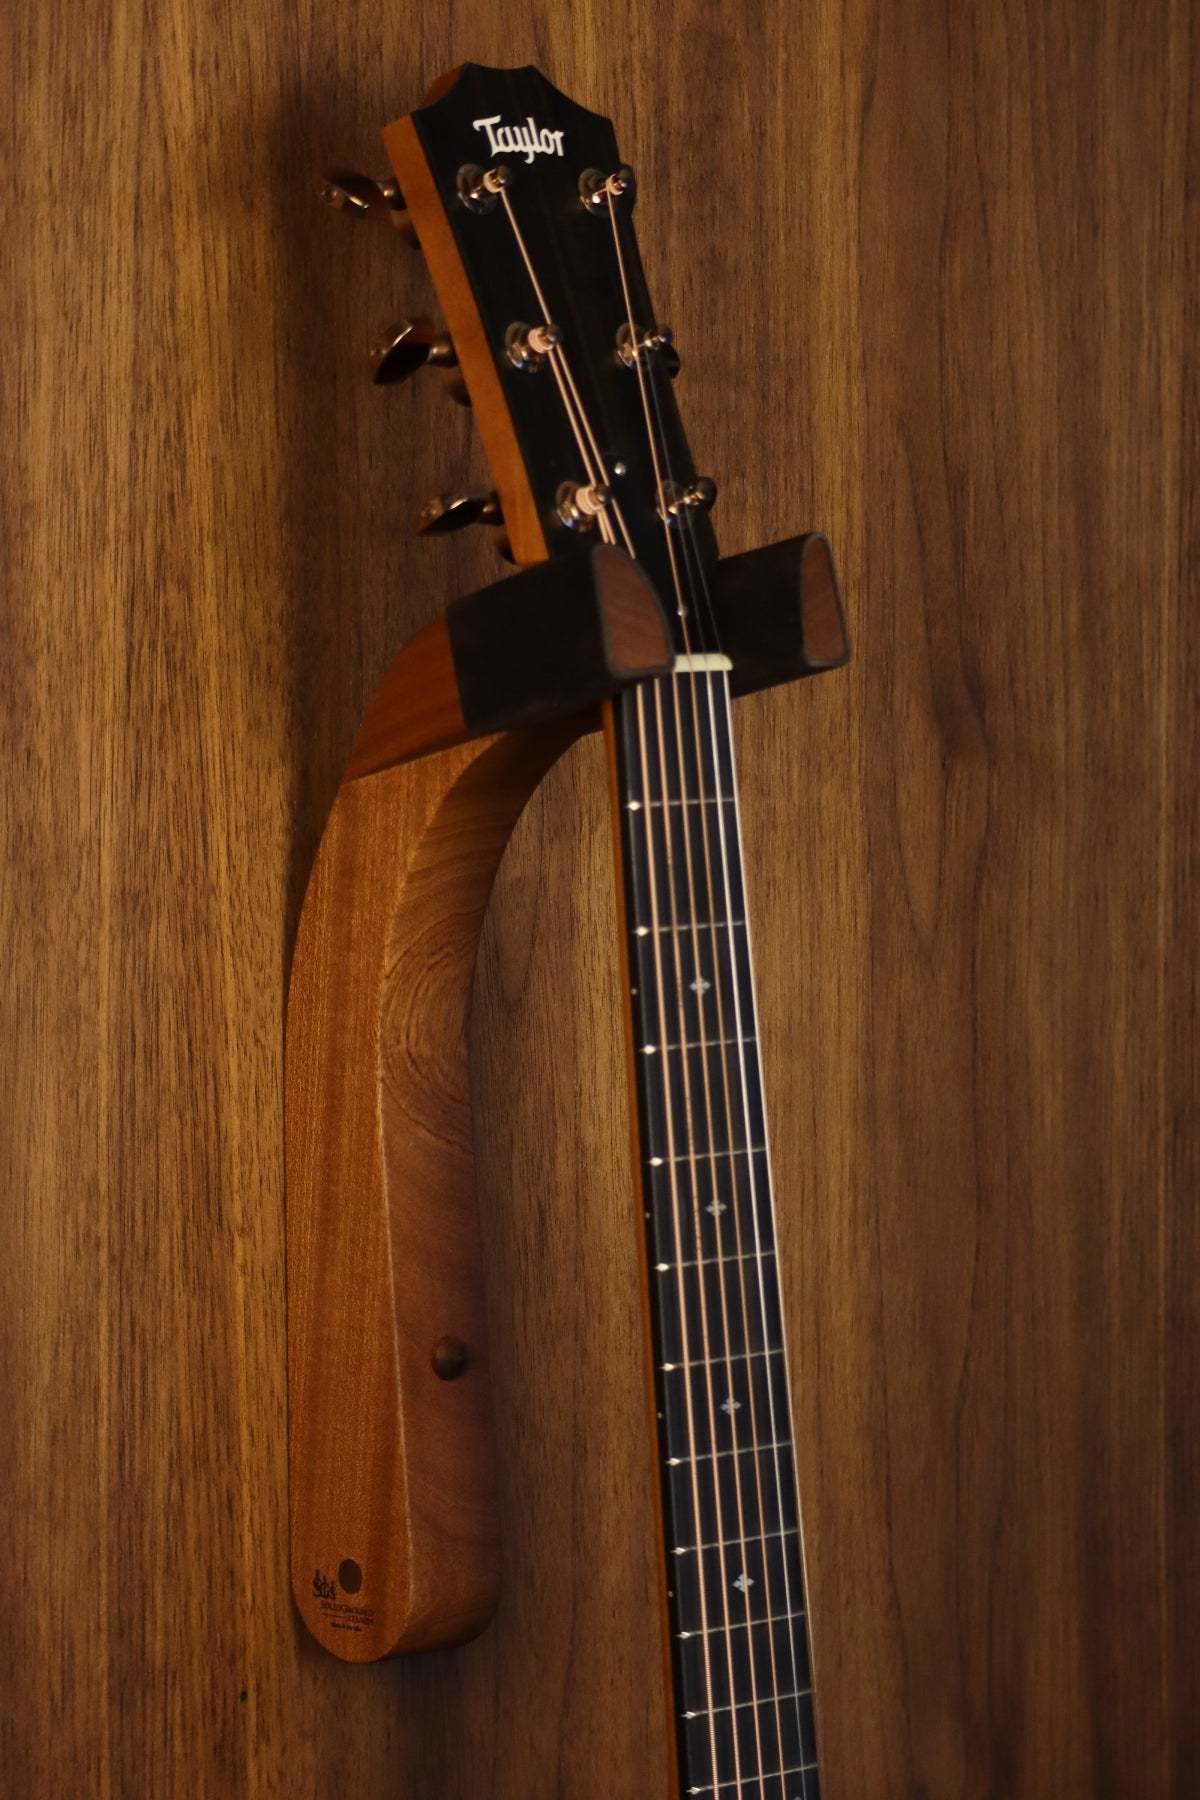 Sapele mahogany wood guitar wall mount hanger installed on paneled wall with Taylor guitar